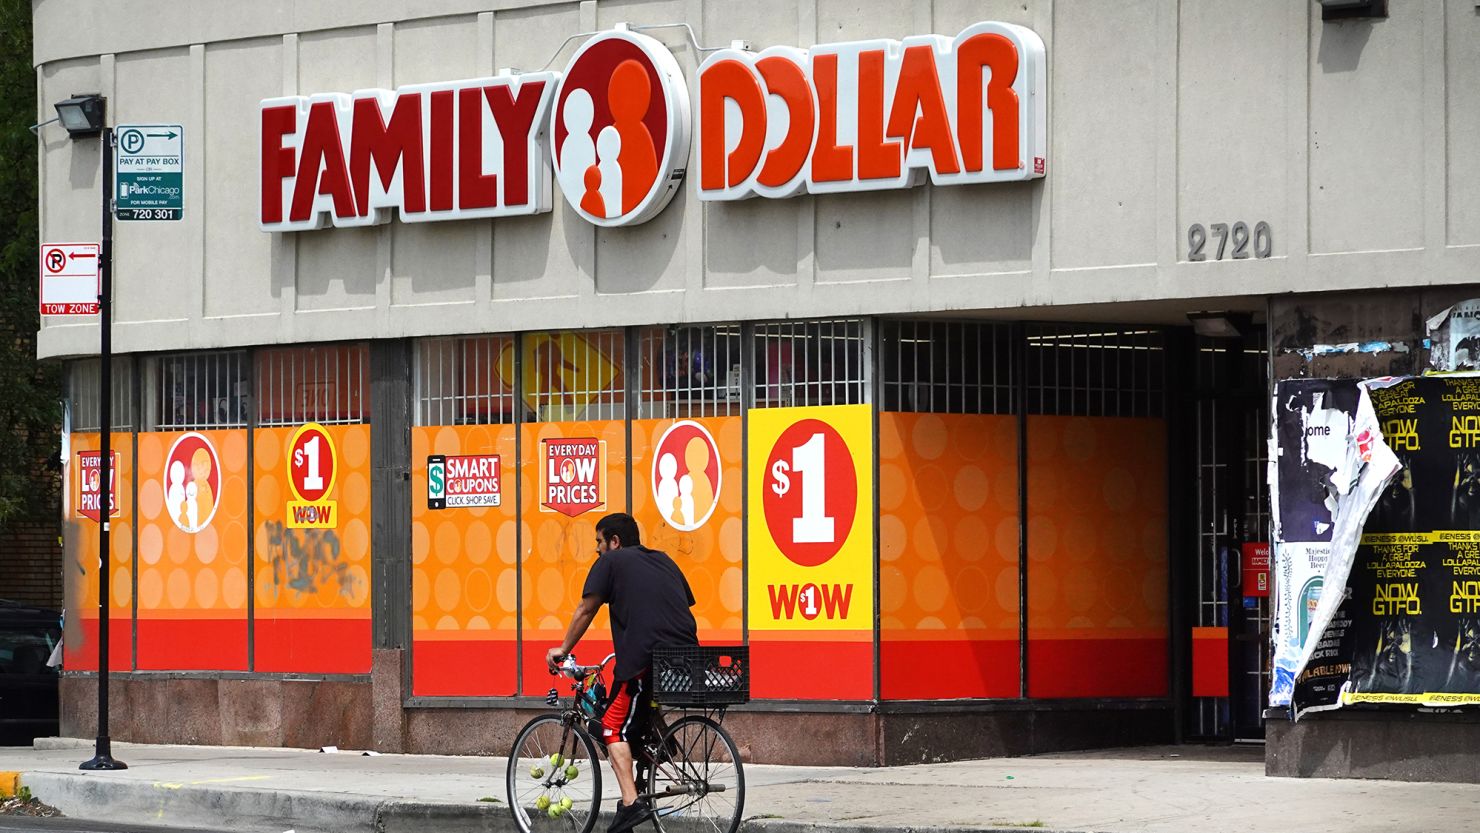 Family Dollar and Dollar Tree will close 1,000 stores | CNN Business